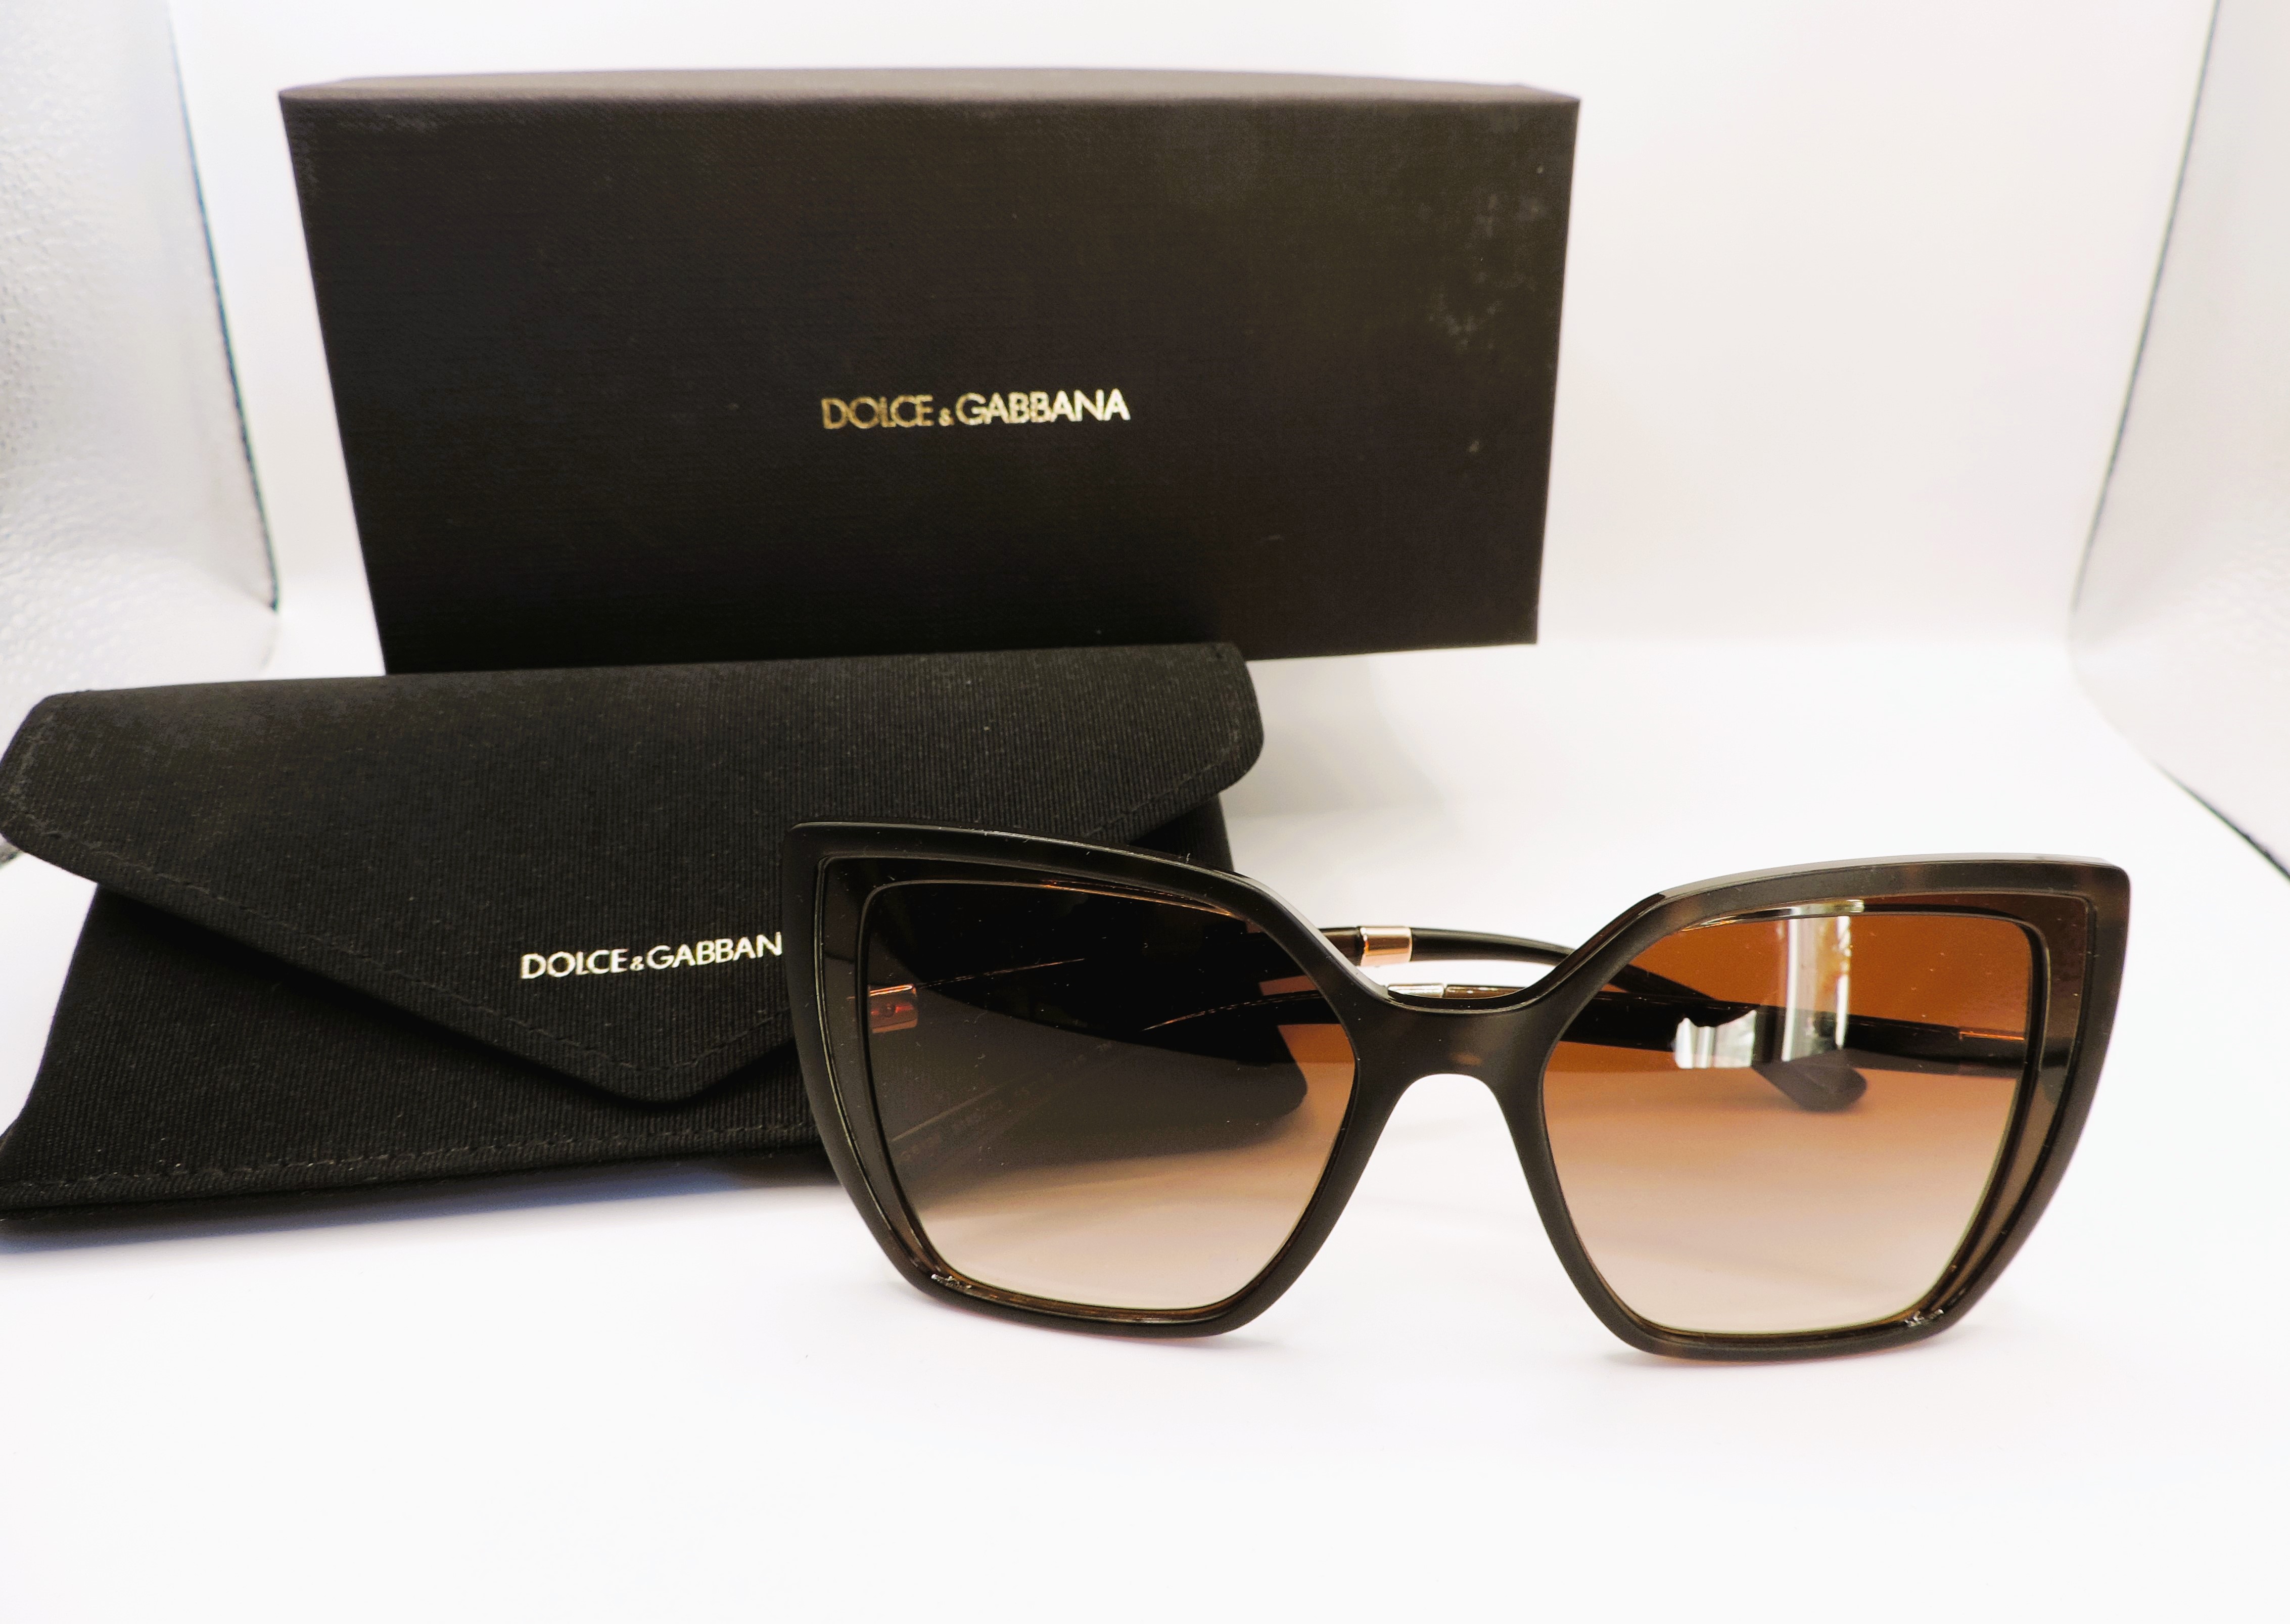 Dolce and Gabbana Sunglasses DG6138 New With Case and Box - Image 11 of 11